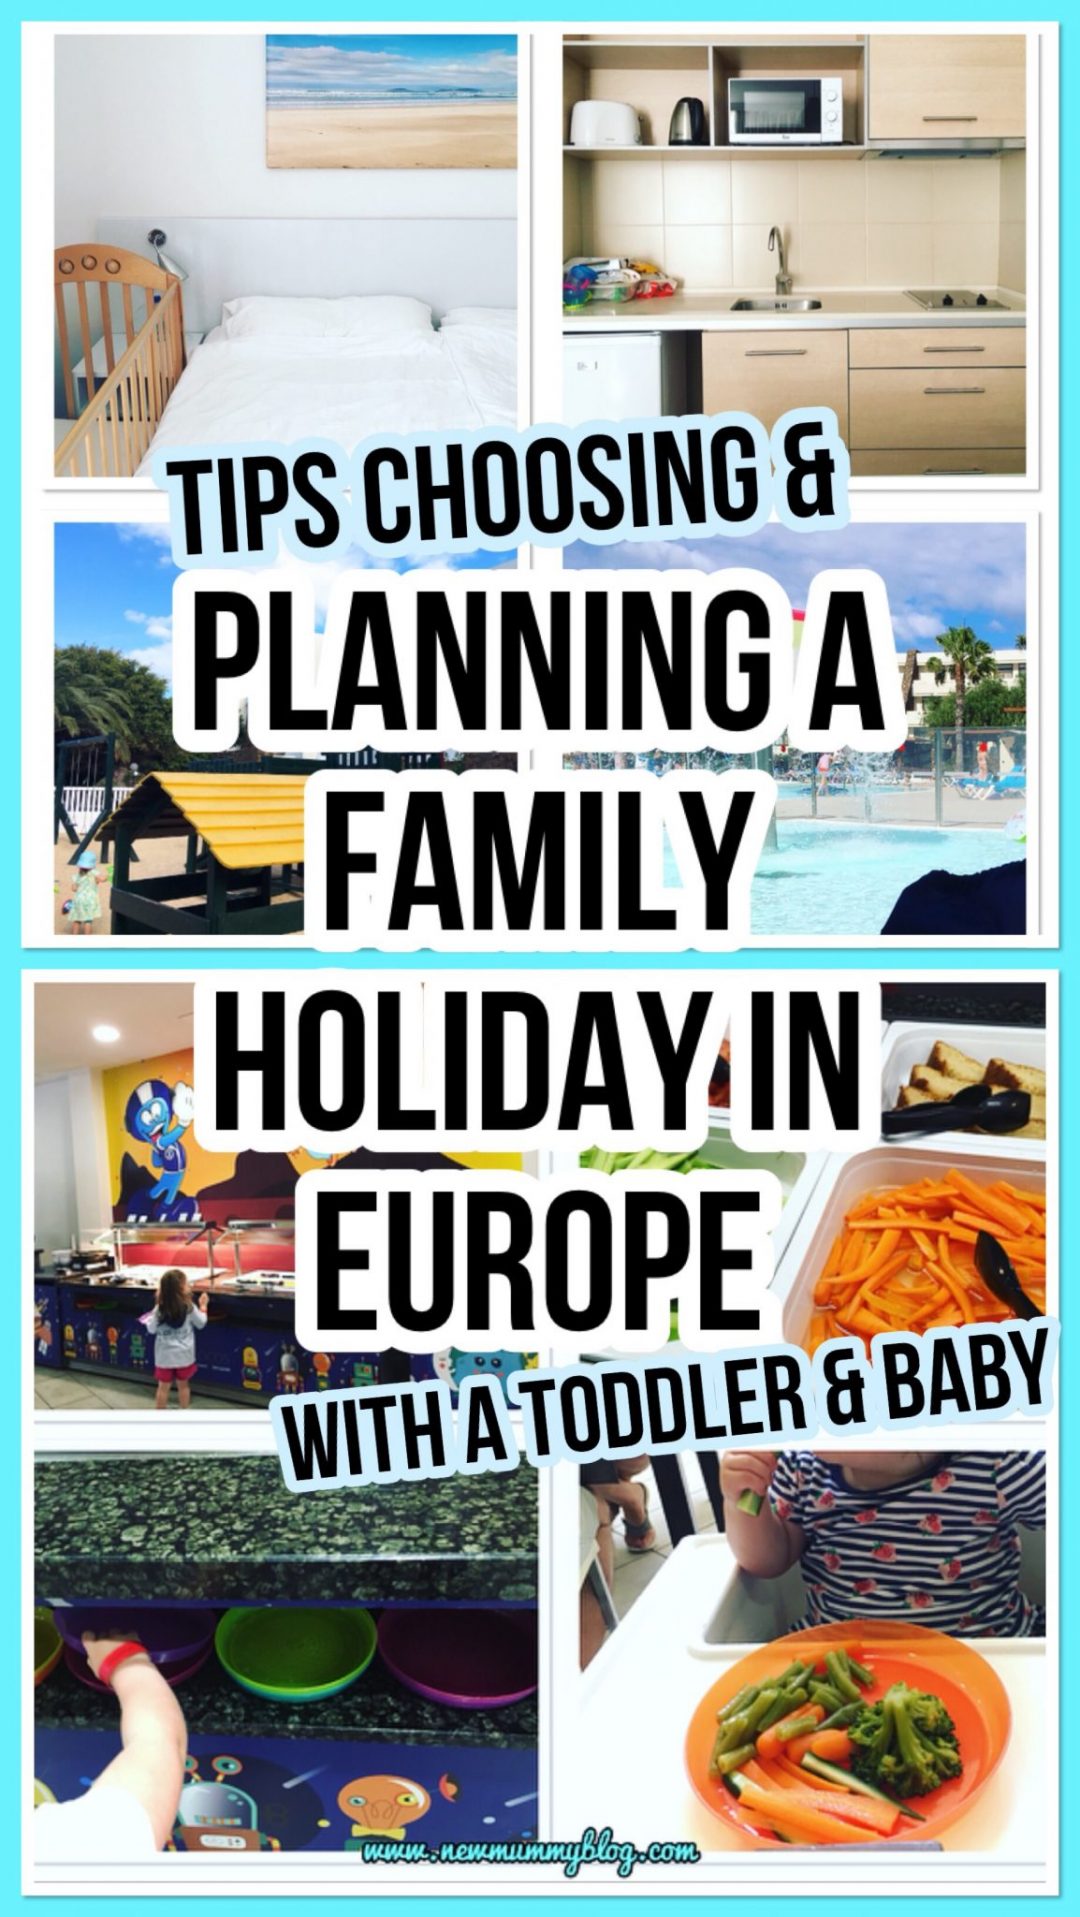 Tips for choosing and planning a brilliant successful family holiday in Europe - all inclusive hotel features including one bedroom, kitchen, play park, splash kids pool and kids buffet 